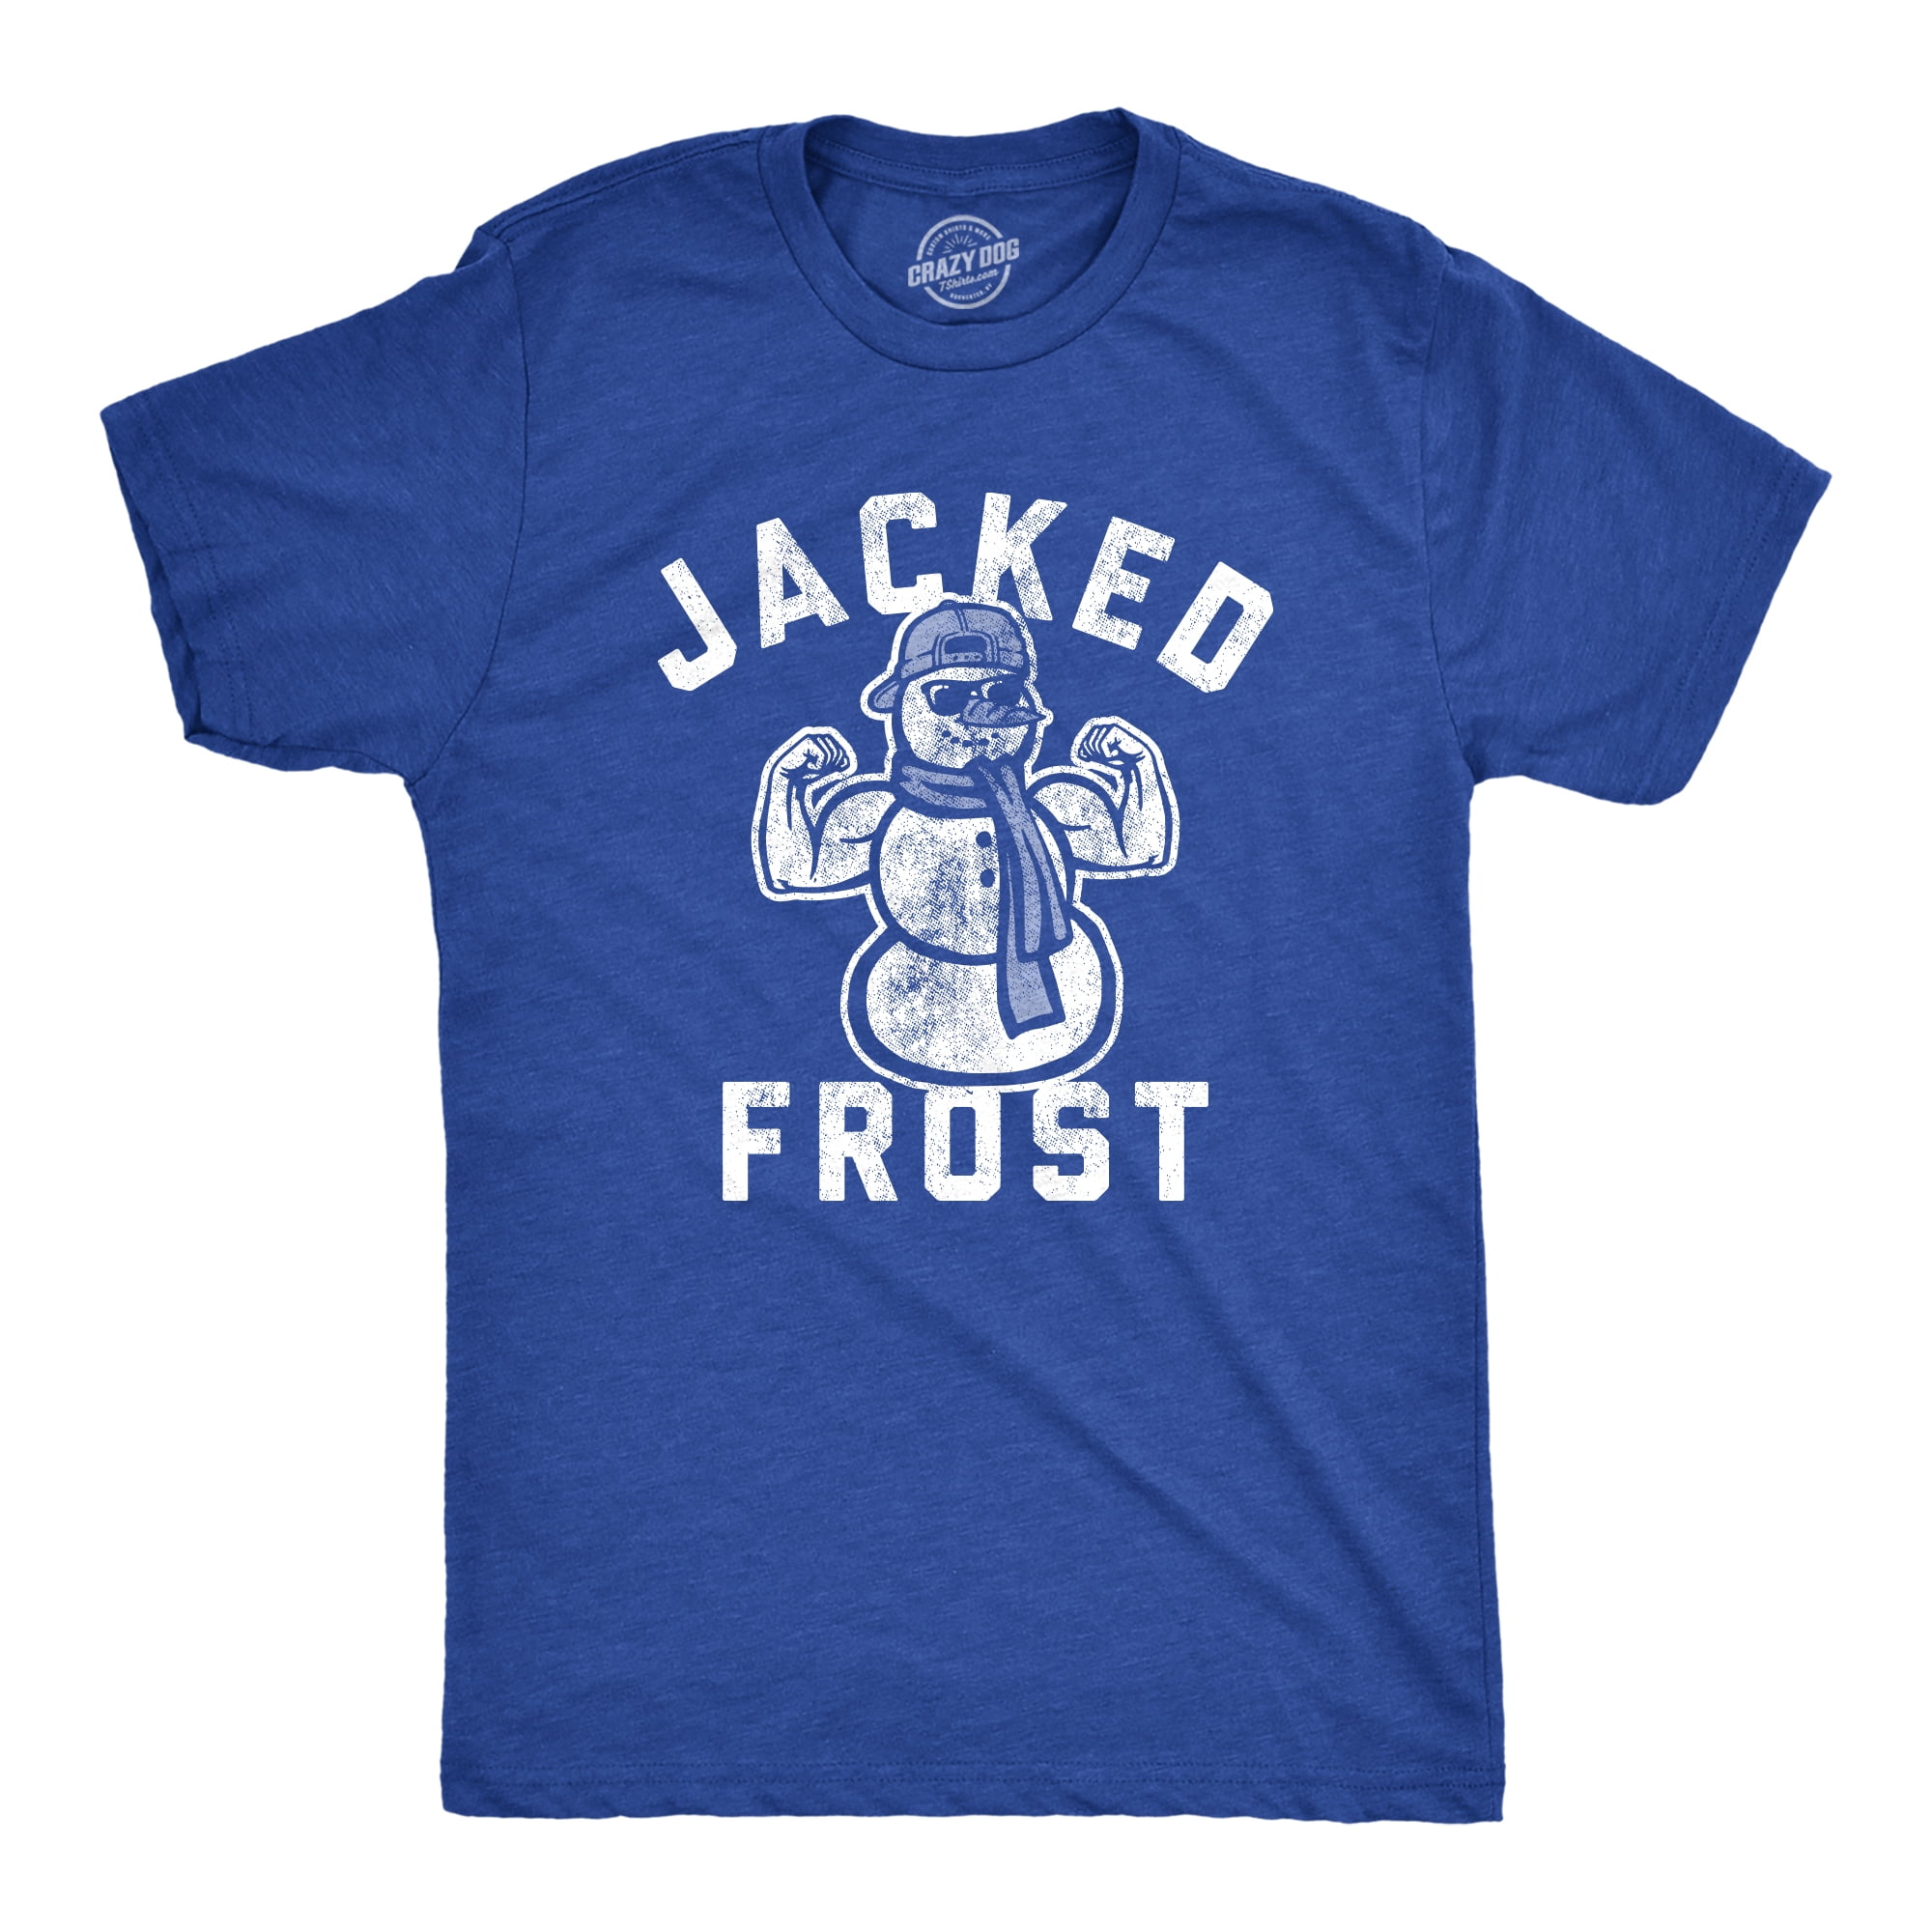 Mens Jacked Frost Tshirt Funny Christmas Party Winter Novelty Graphic Tee  For Men Graphic Tees 